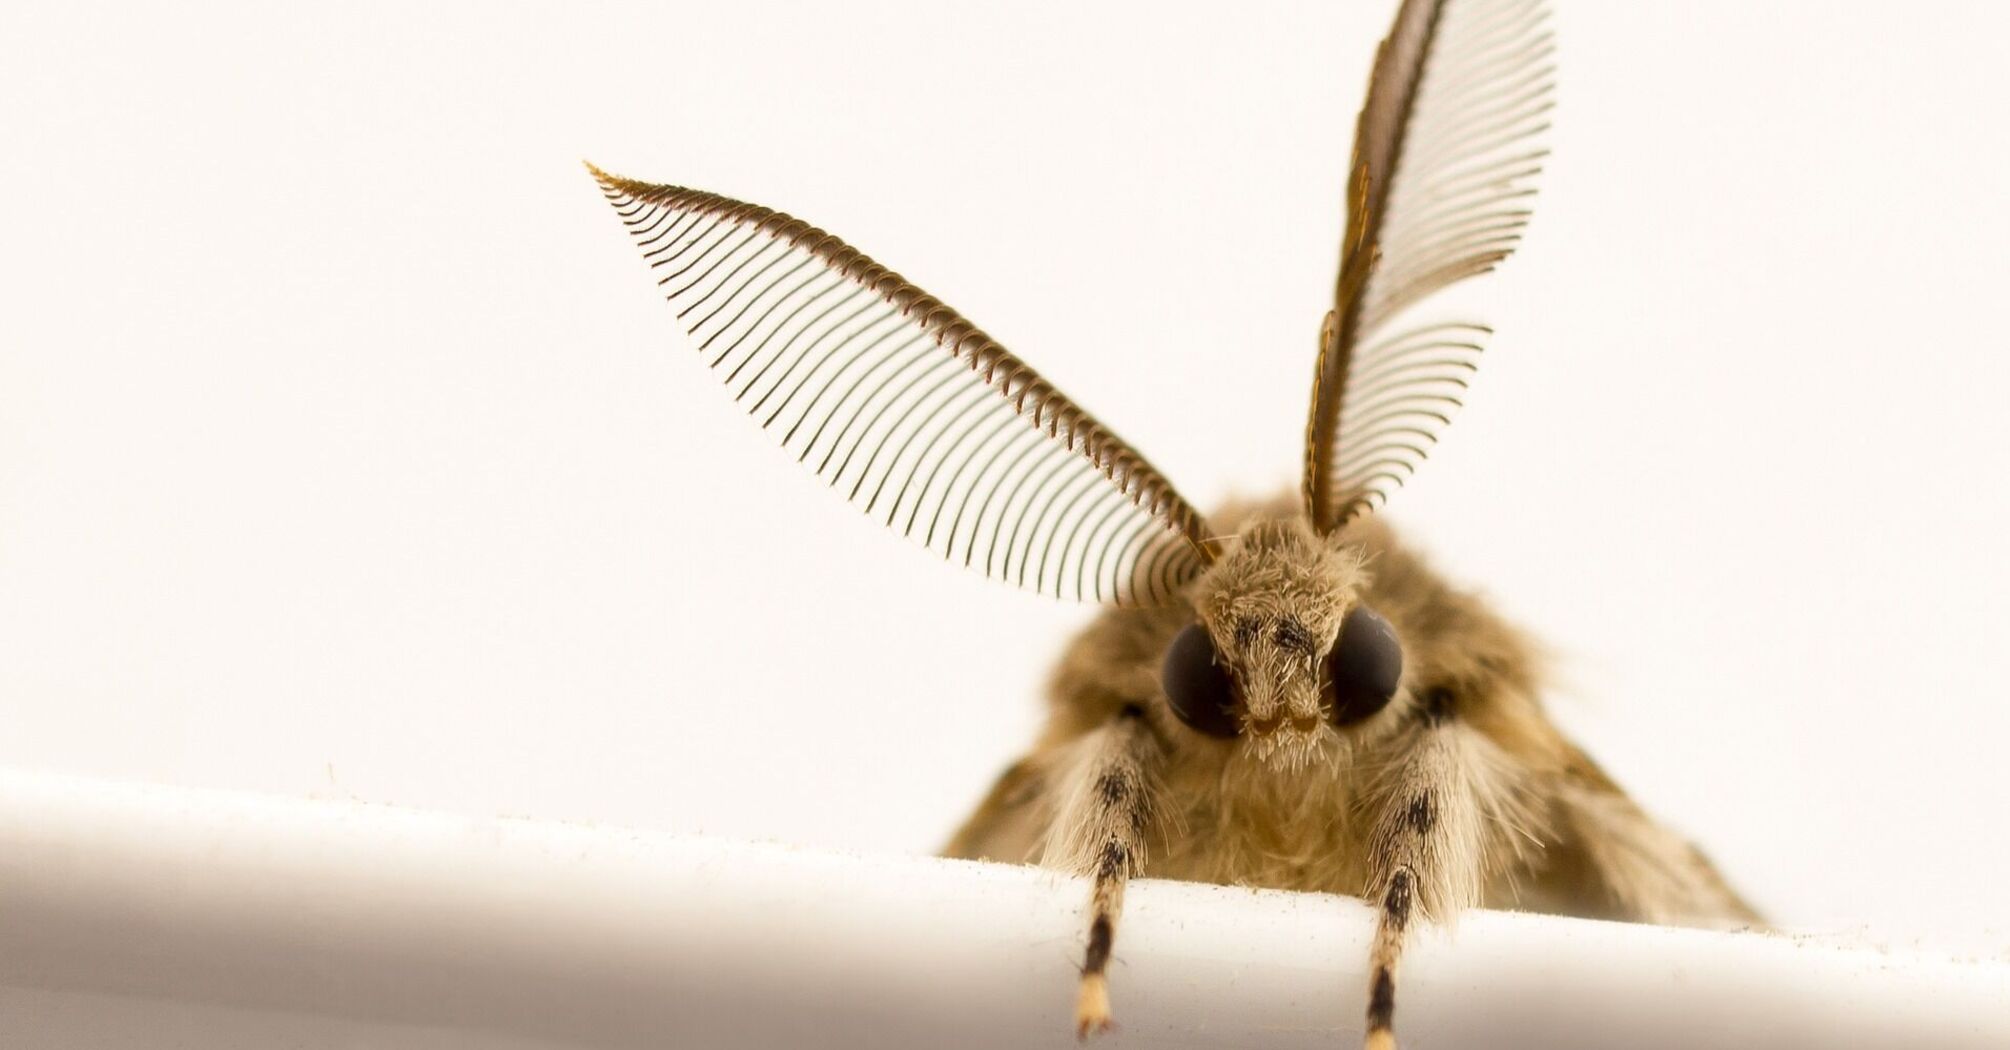 How to get rid of moths in the house: natural and chemical methods